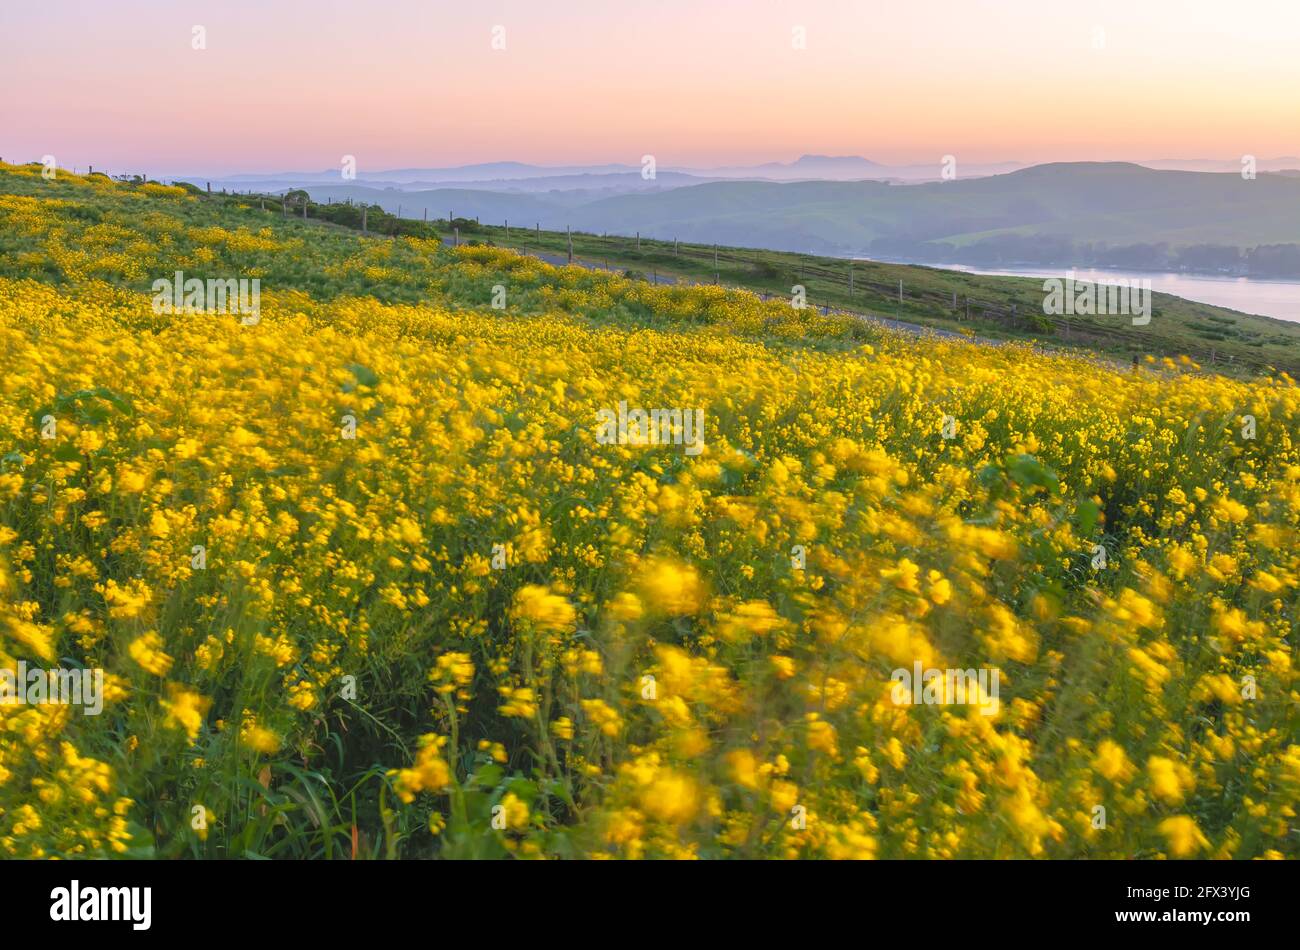 Blooming field mustard Brassica rapa overlooking the Tomales Bay in background in Point Reyes National Seashore, California,USA, on a windy morning. Stock Photo